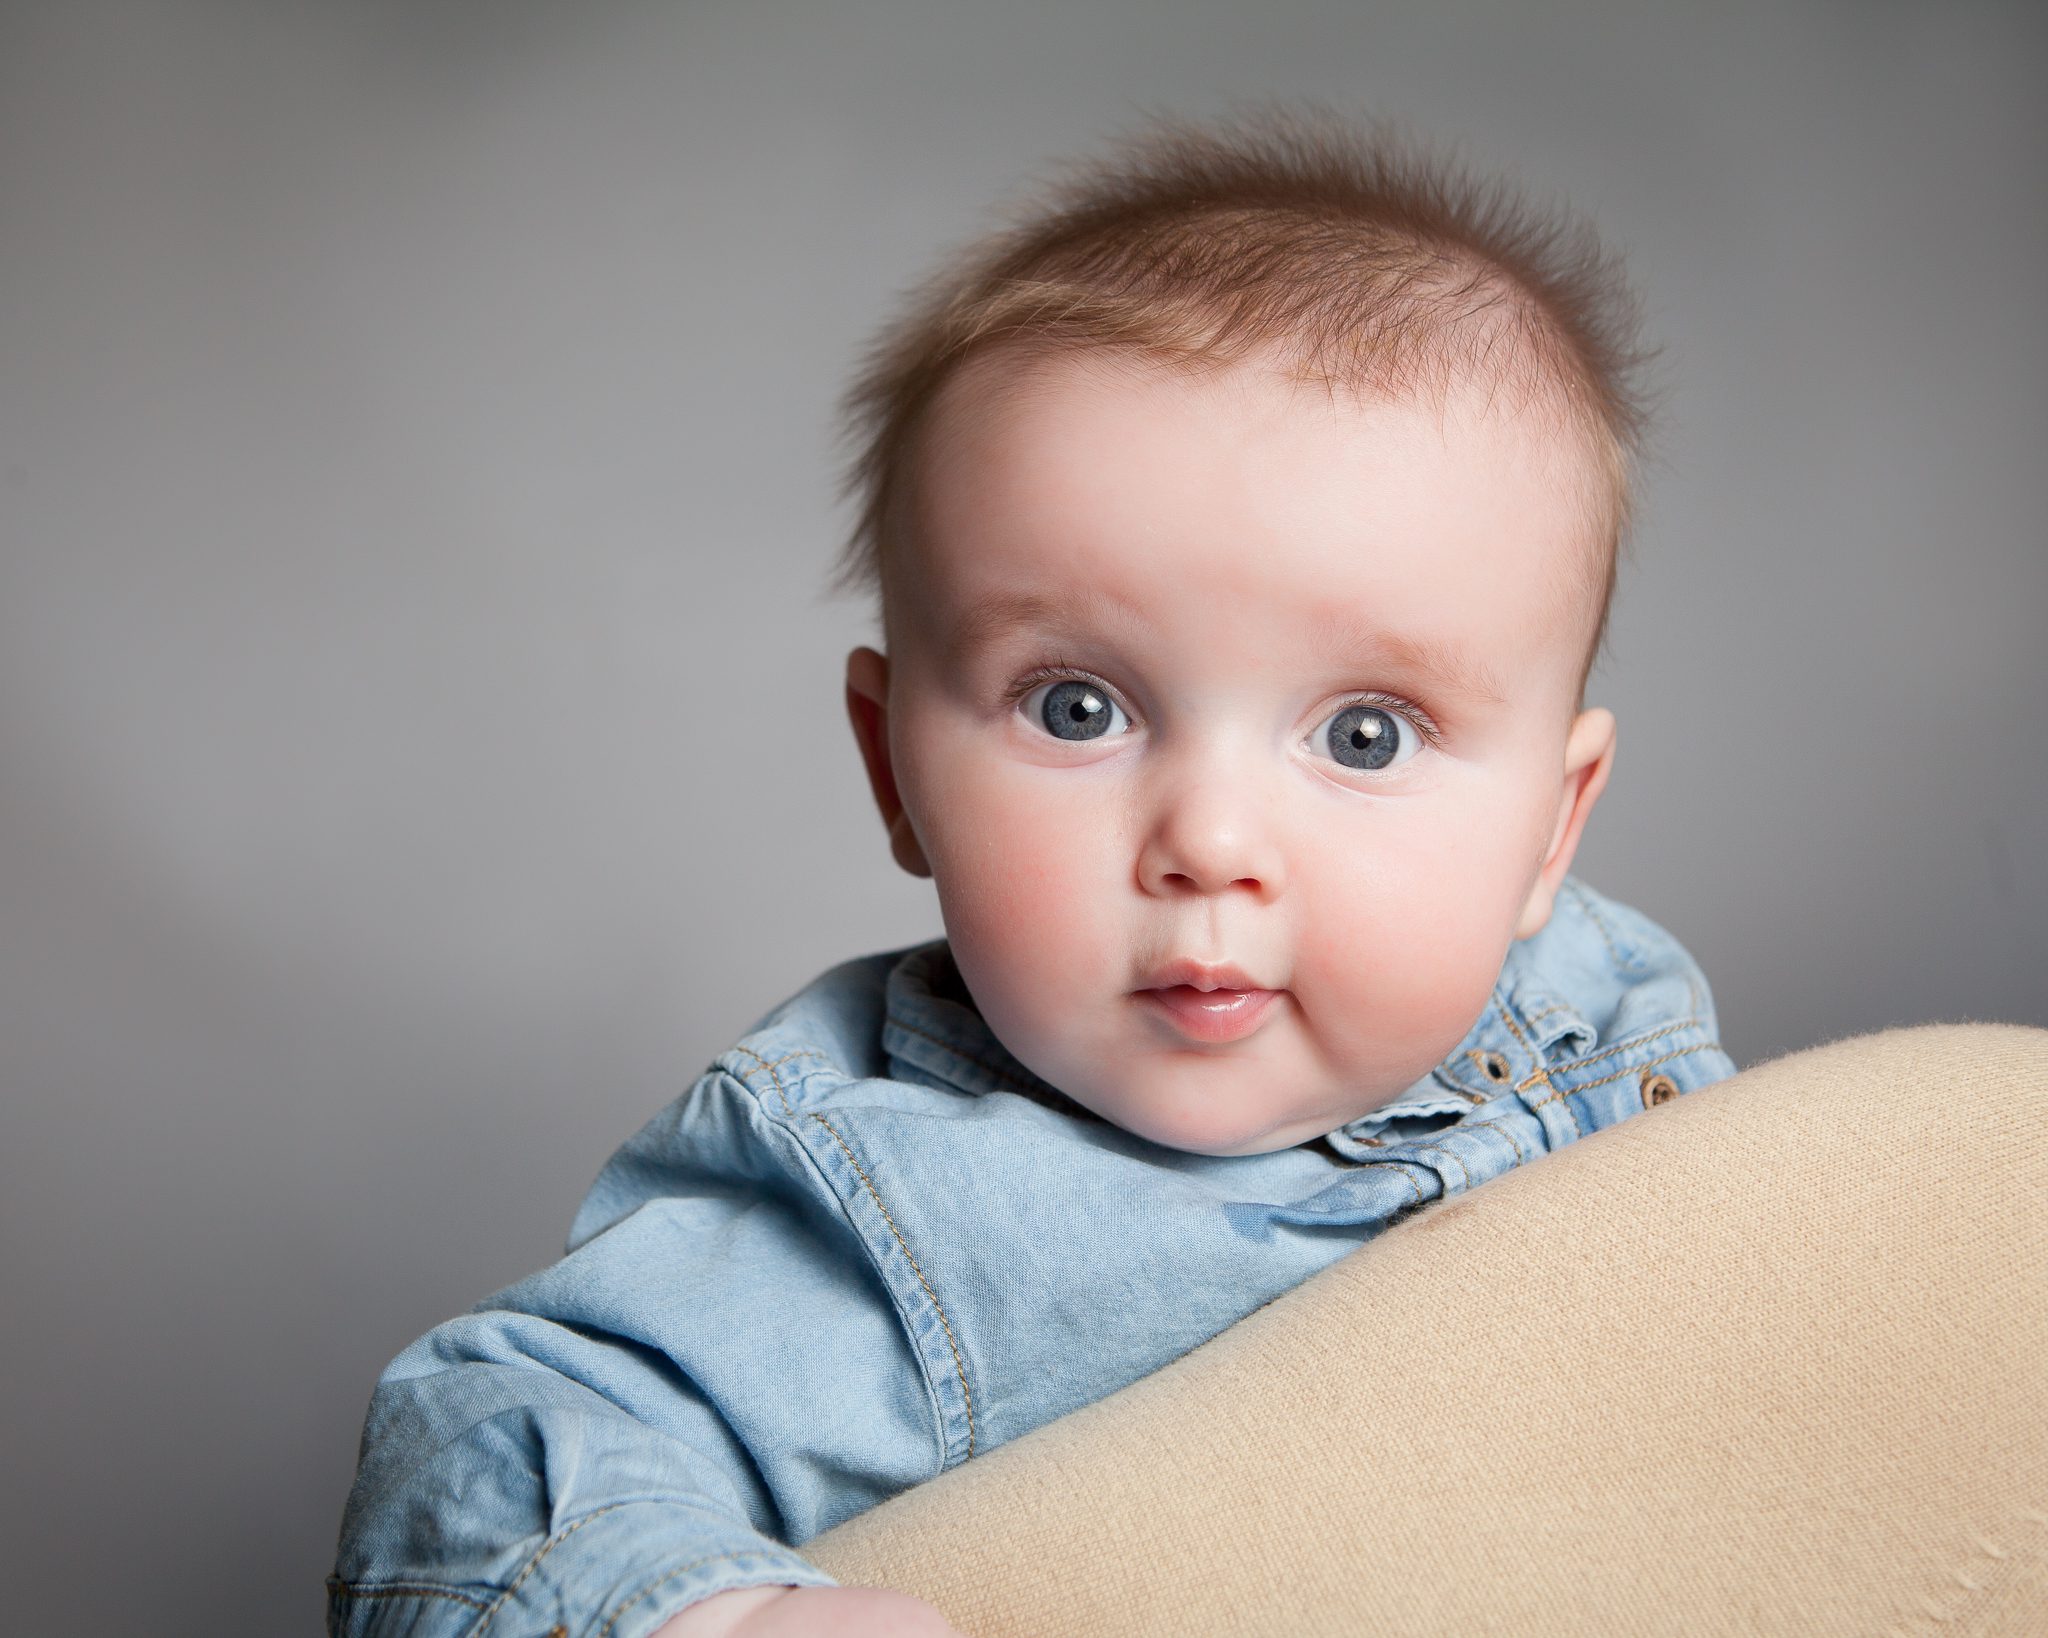 Baby and family photographer in Essex, Cambridge, Hertfordshire and Suffolk